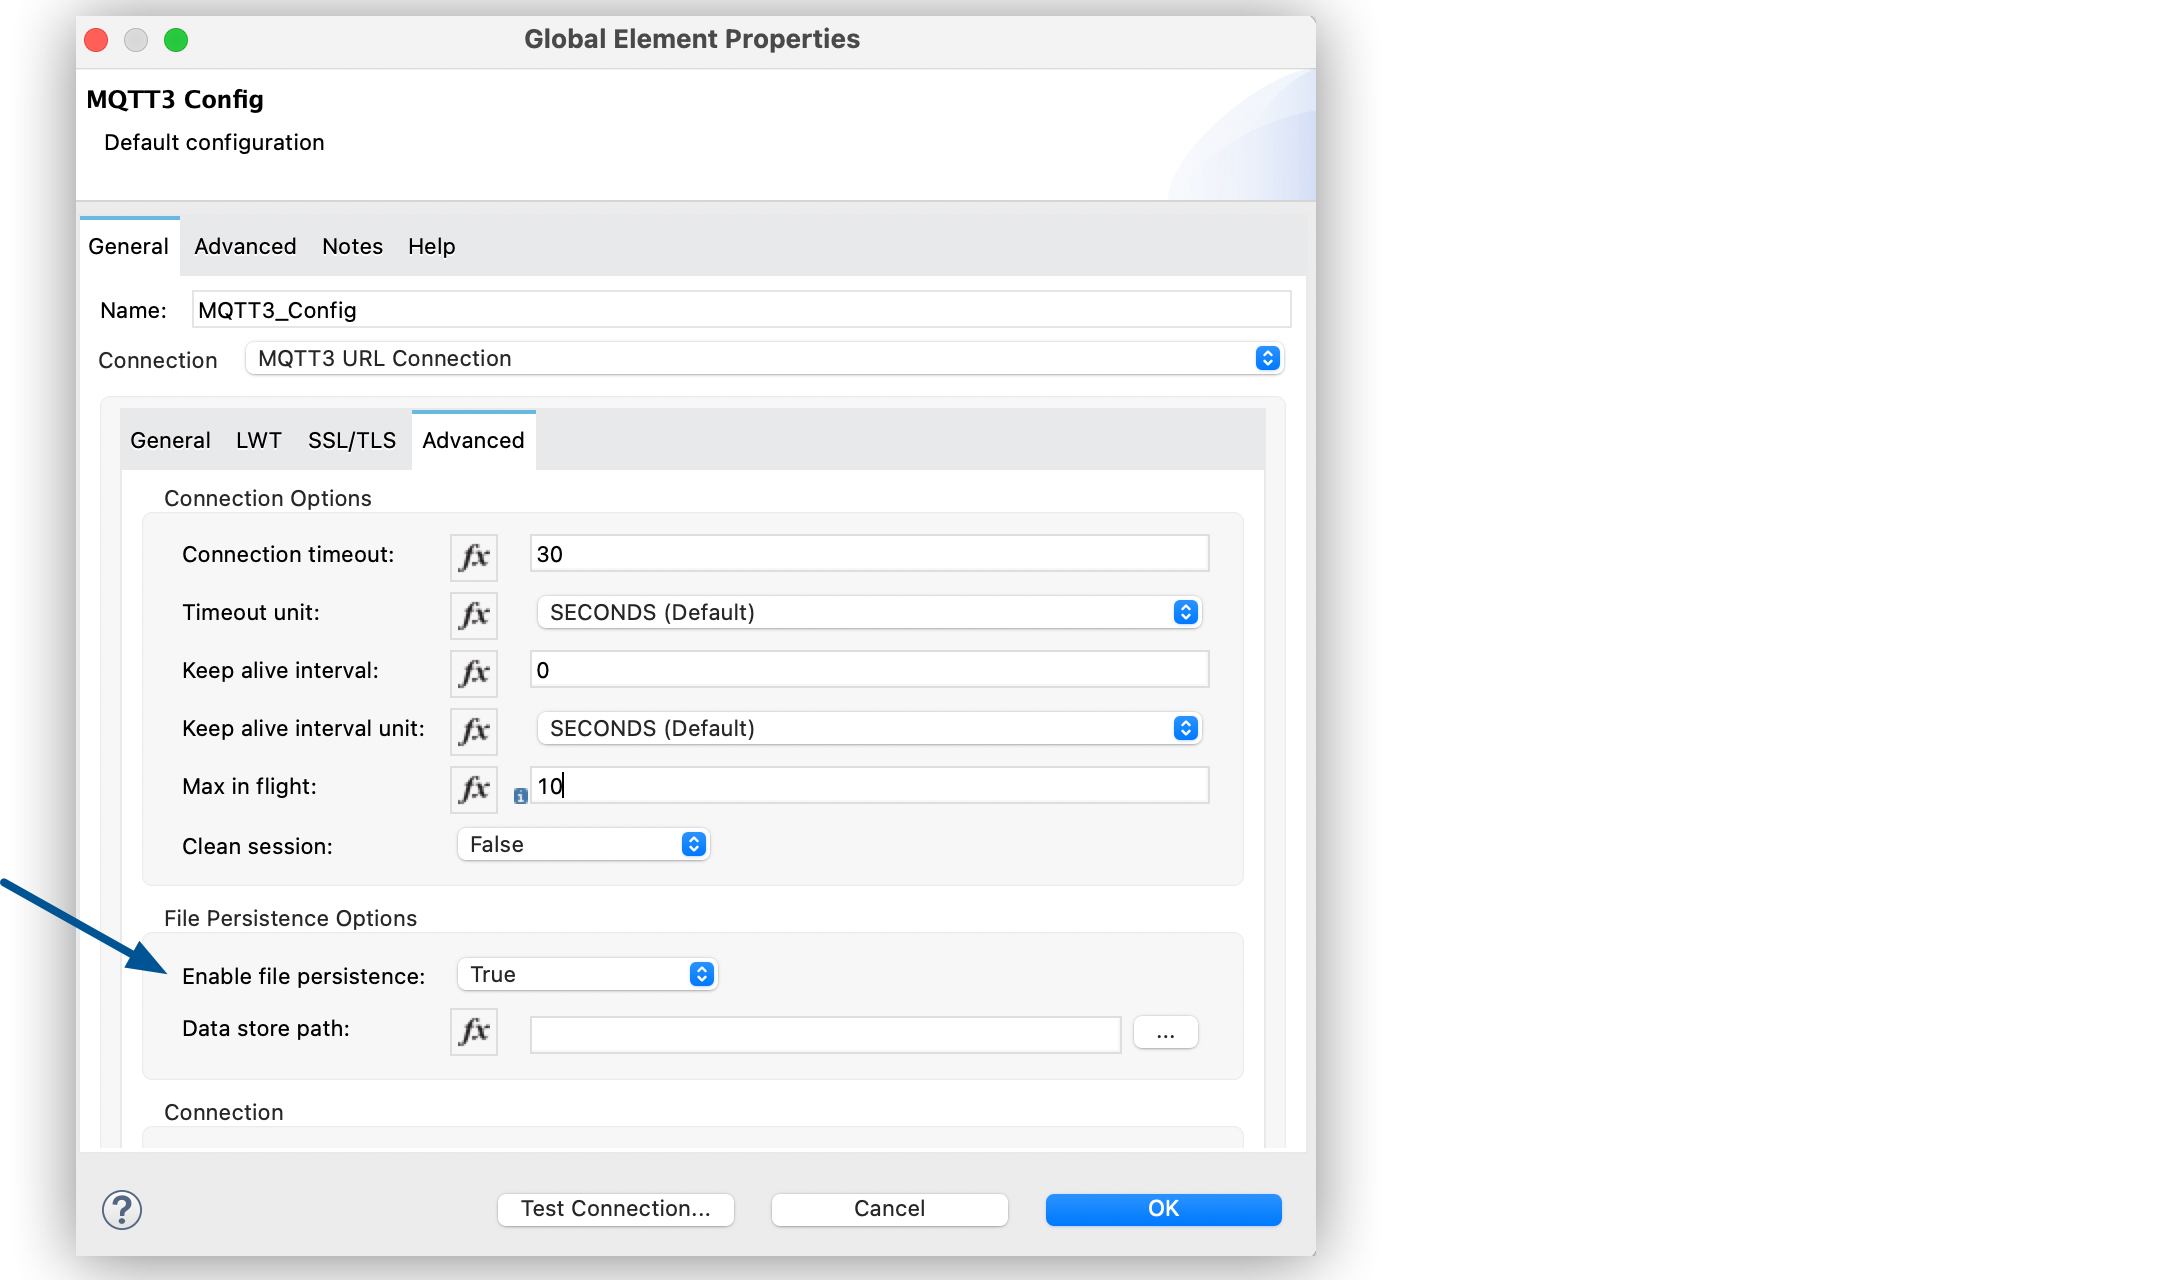 MQTT3 Enable File Persistence configuration in Global Element Properties window